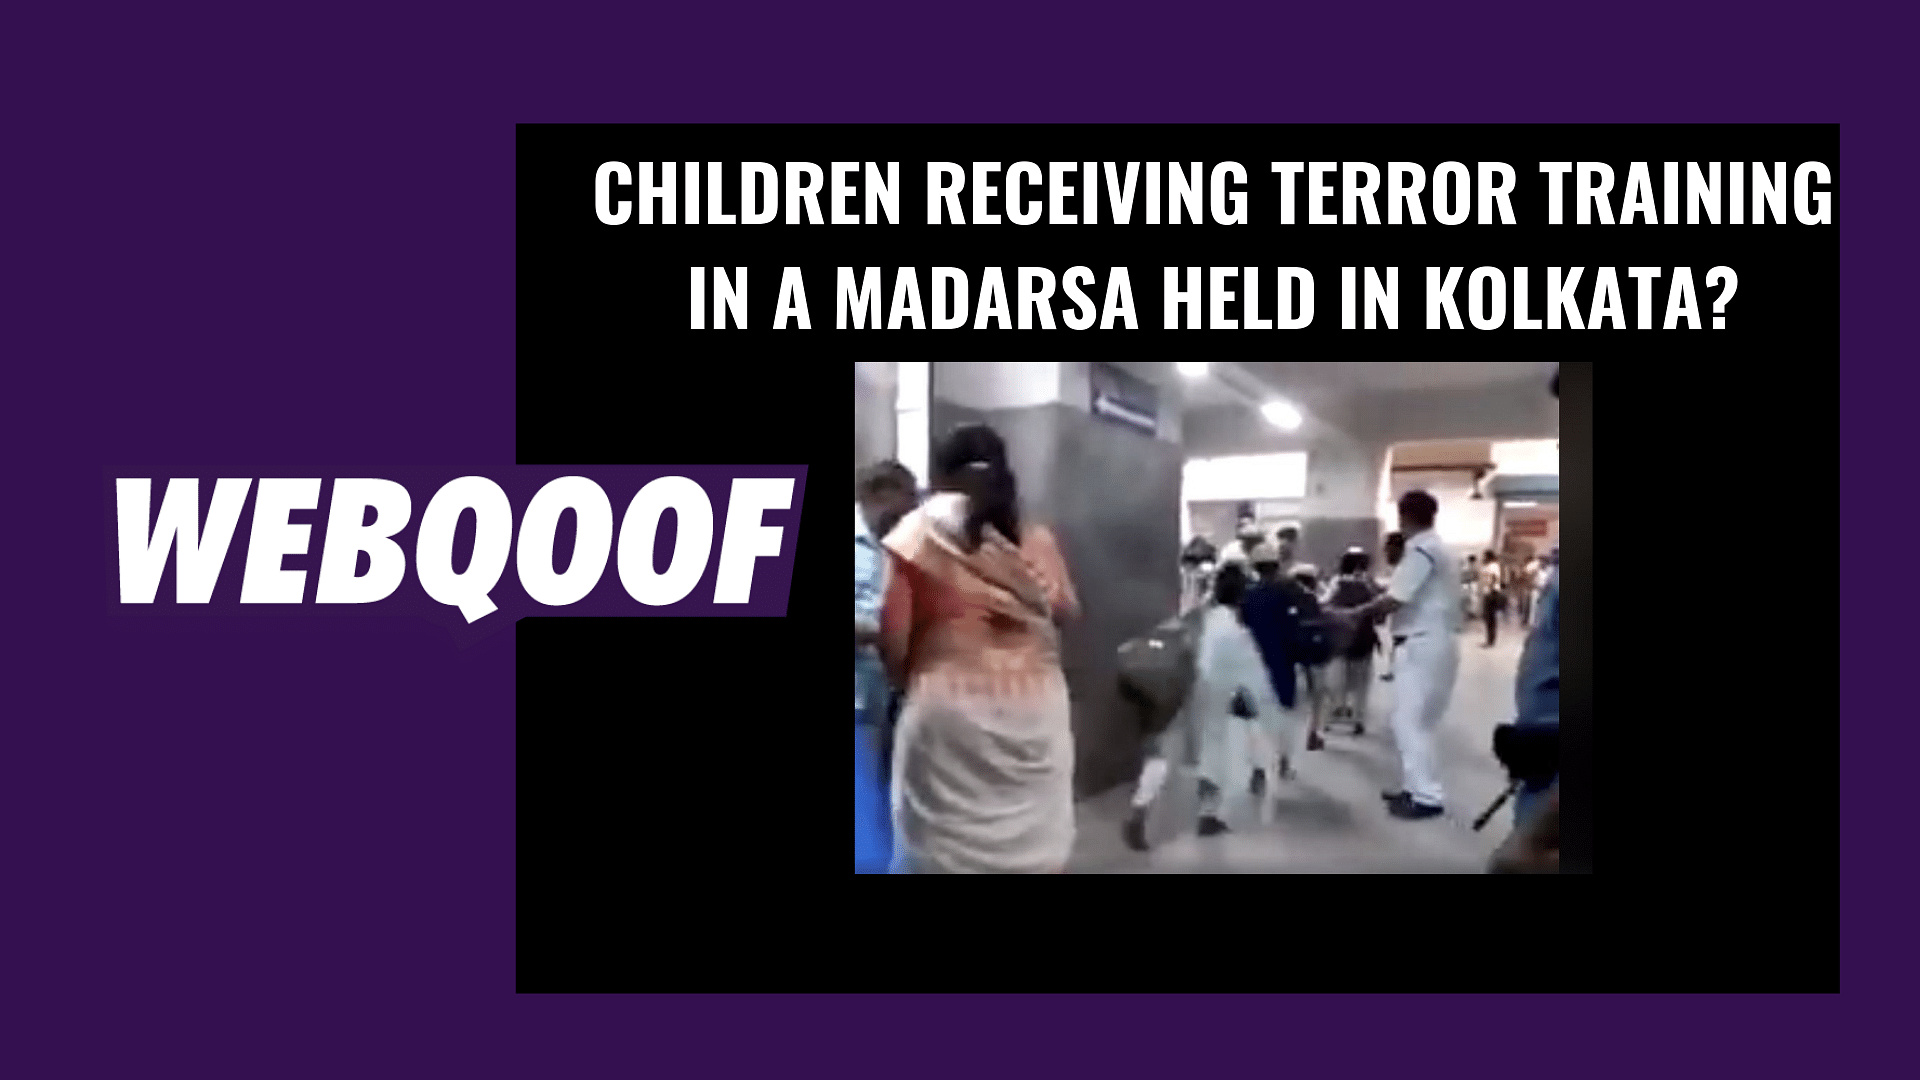 A video which shows some children being held at a railway station in Kolkata has been doing the rounds on social media.